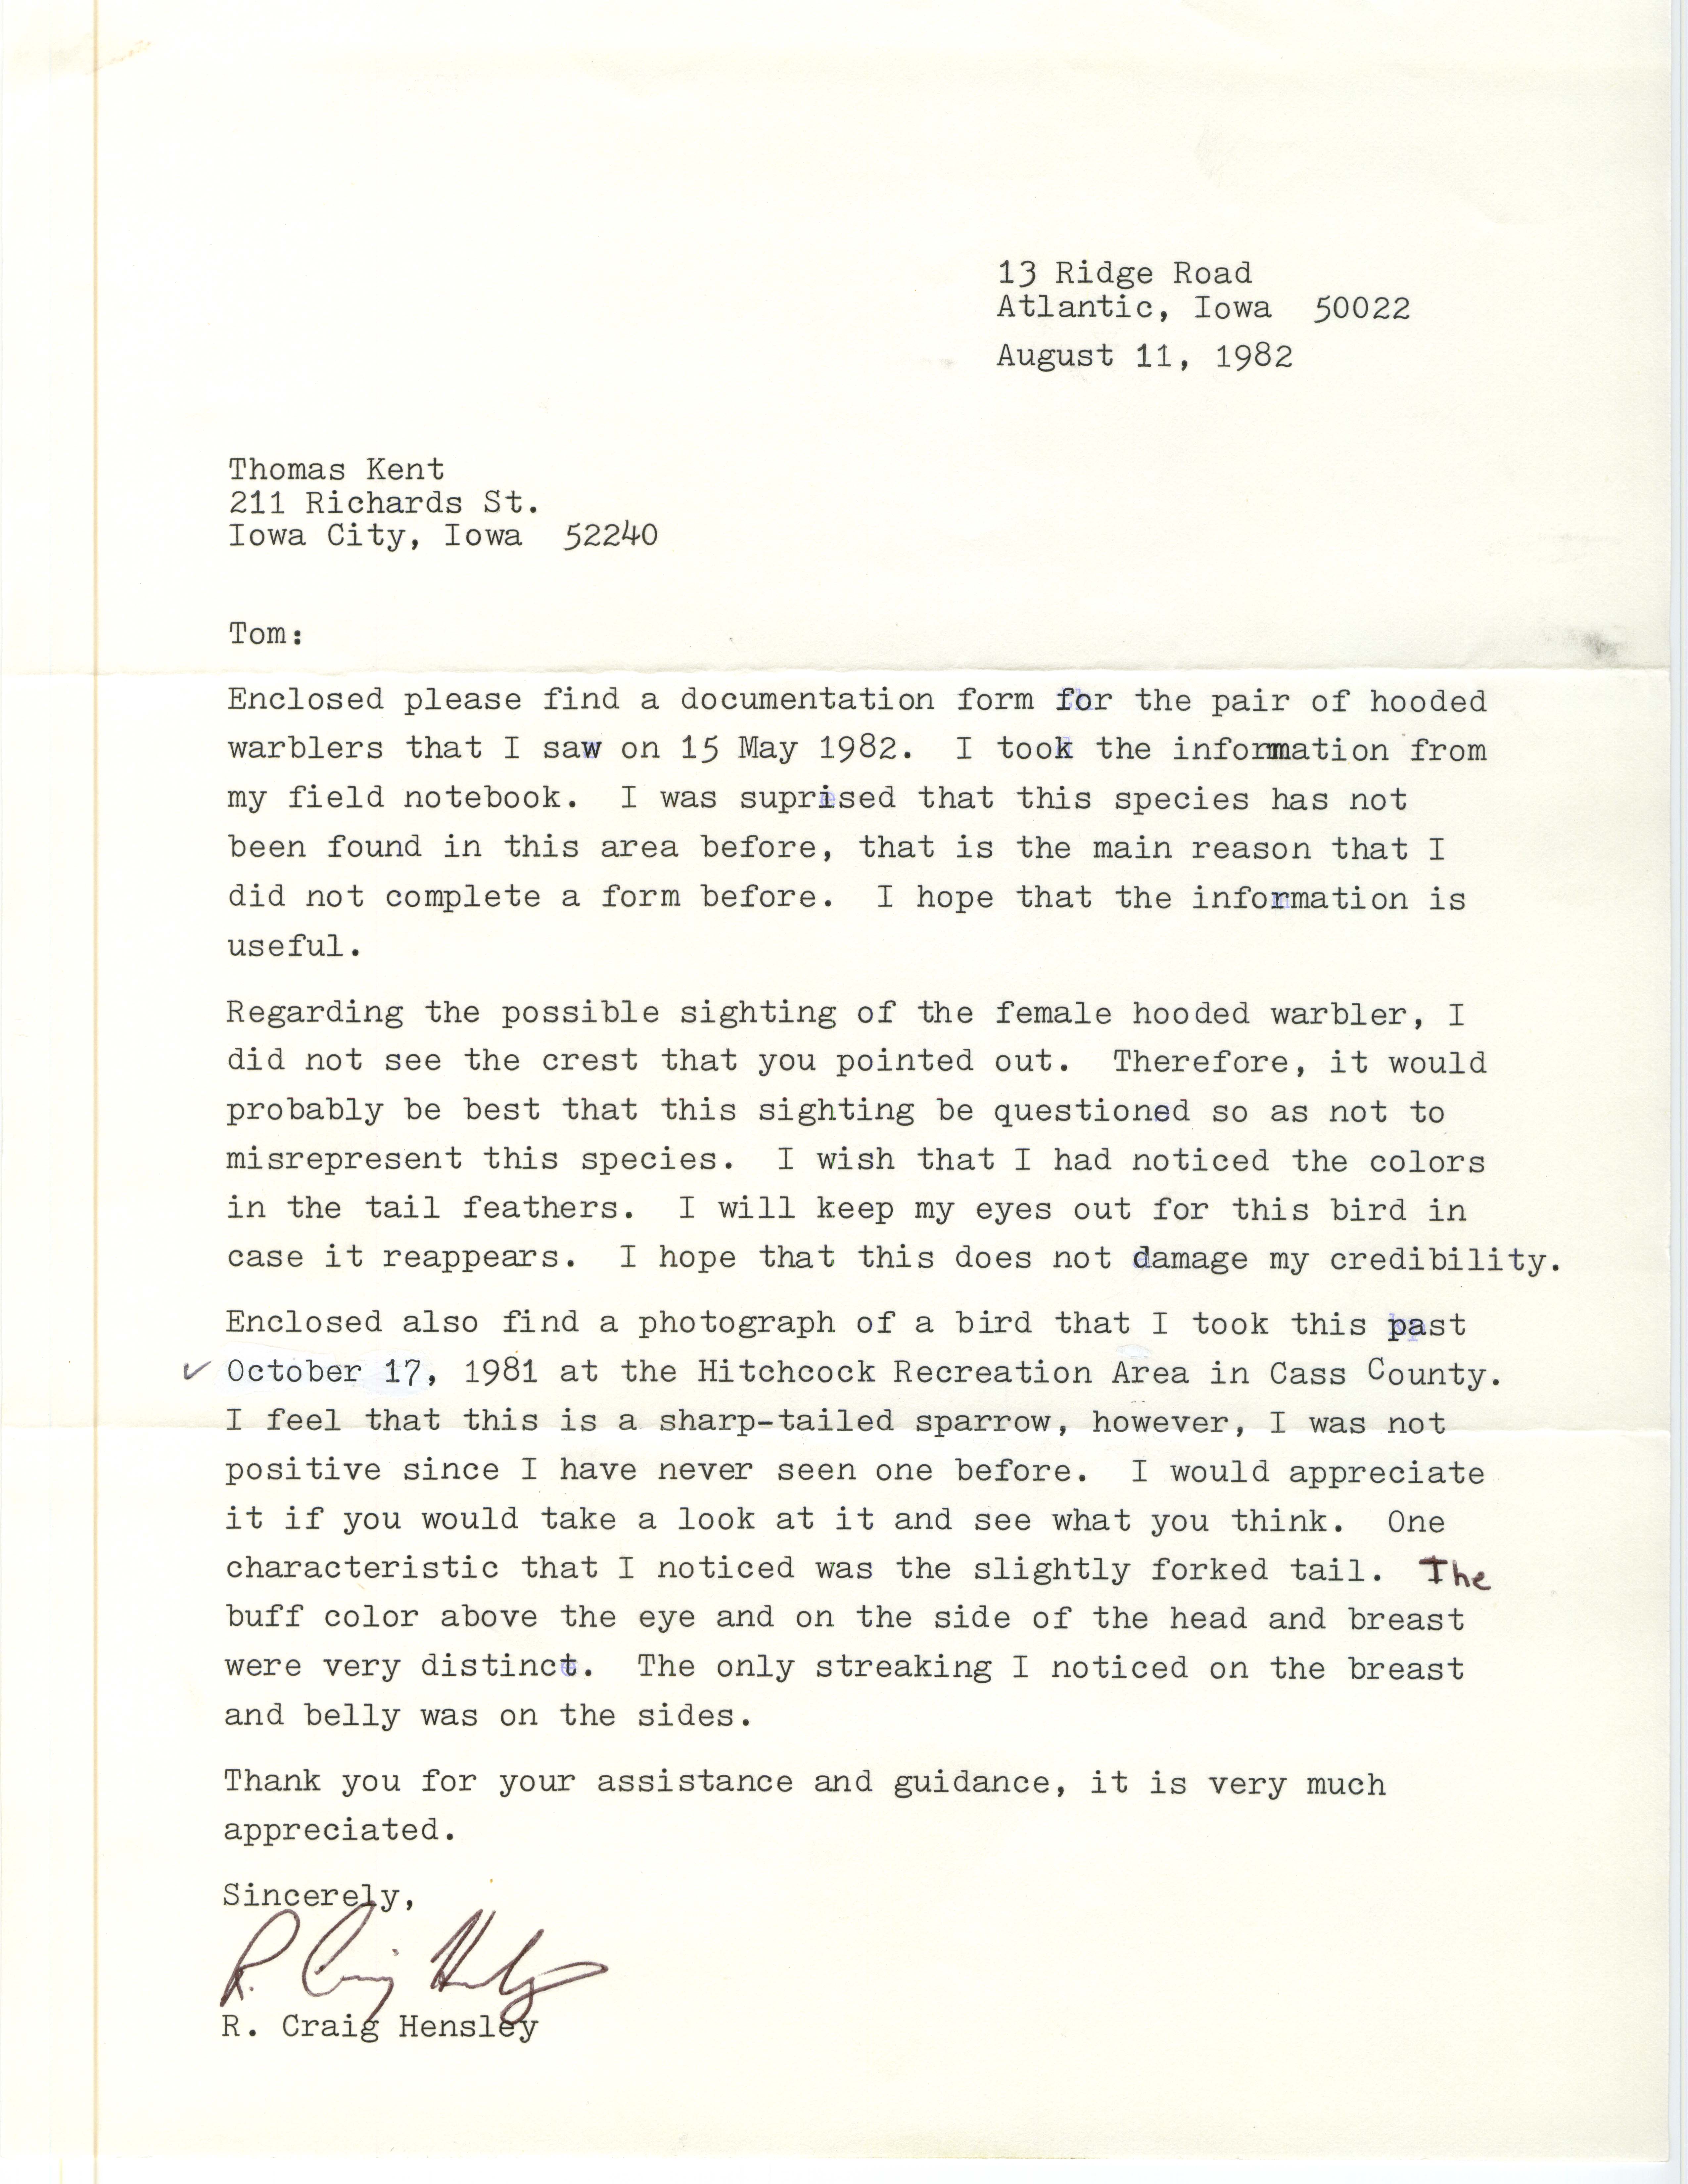 R. Craig Hensley letter to Thomas H. Kent regarding possible bird sightings and attached field notes, August 11, 1982